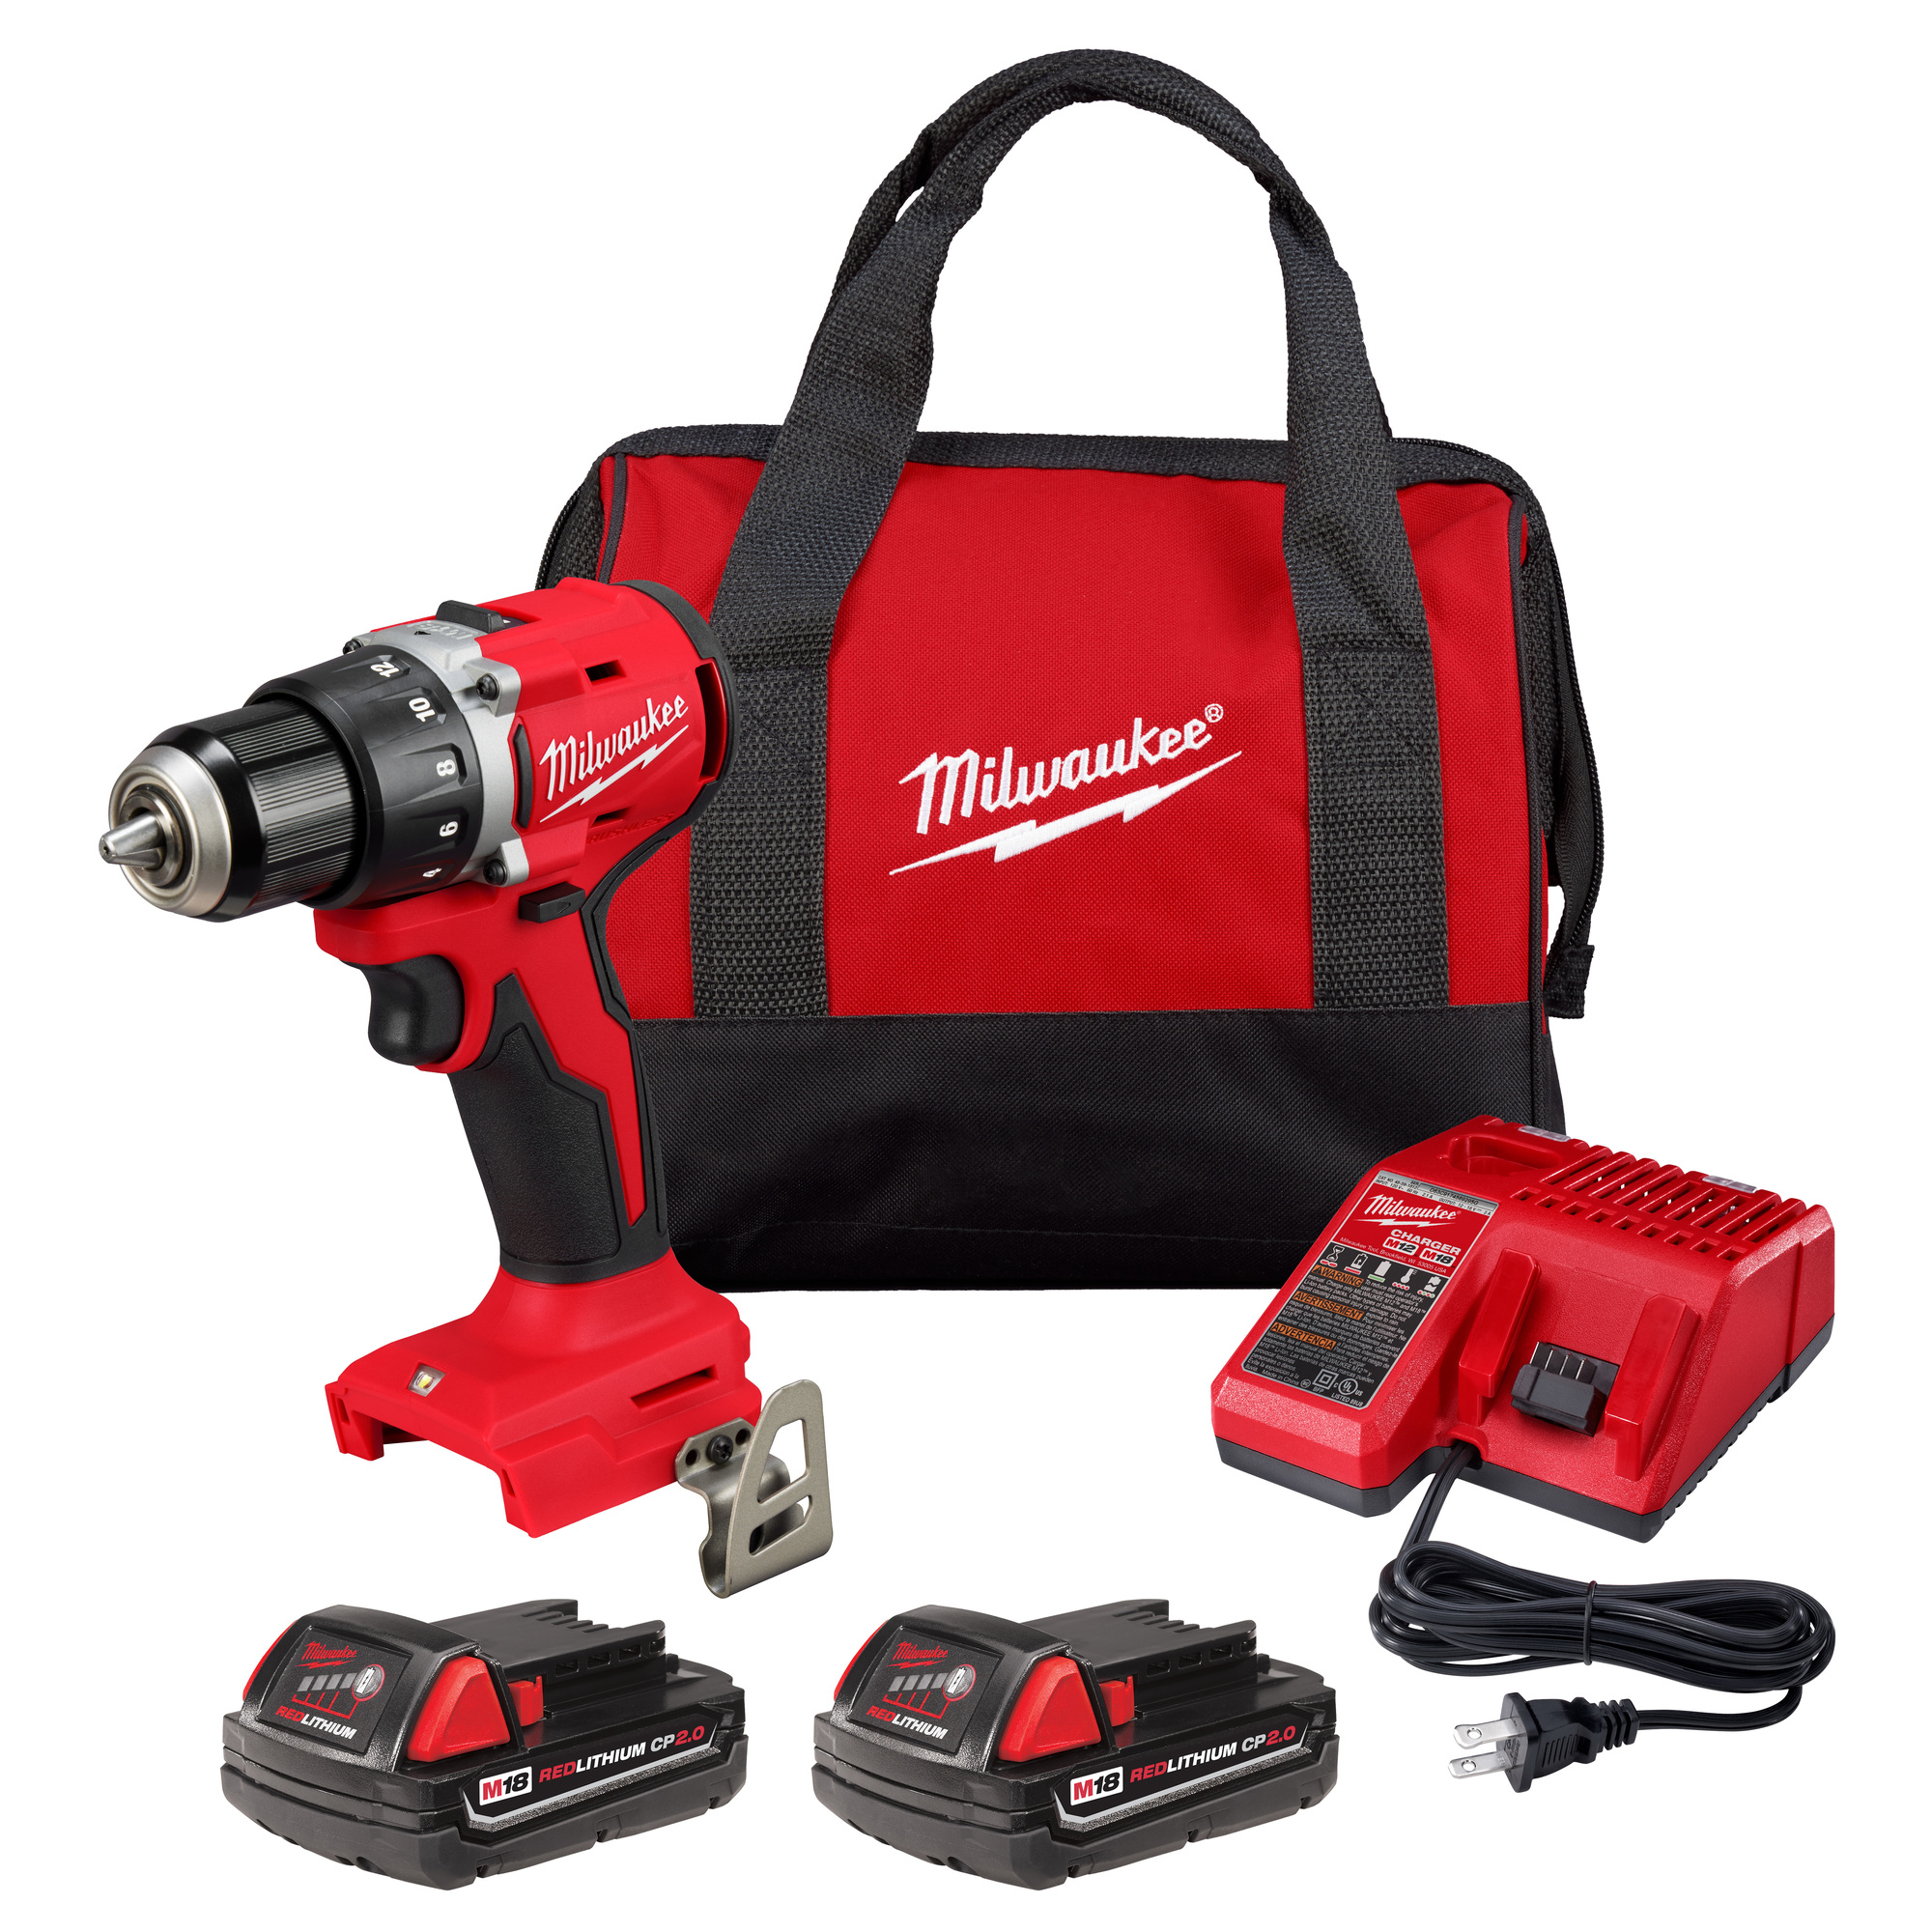 Milwaukee, M18 Compact Brushless 1/2Inch Drill/Driver Kit, Chuck Size 1/2 in, Max. Torque 500 ft-lbs., Max. Speed 1700 rpm, Model 3601-22CT